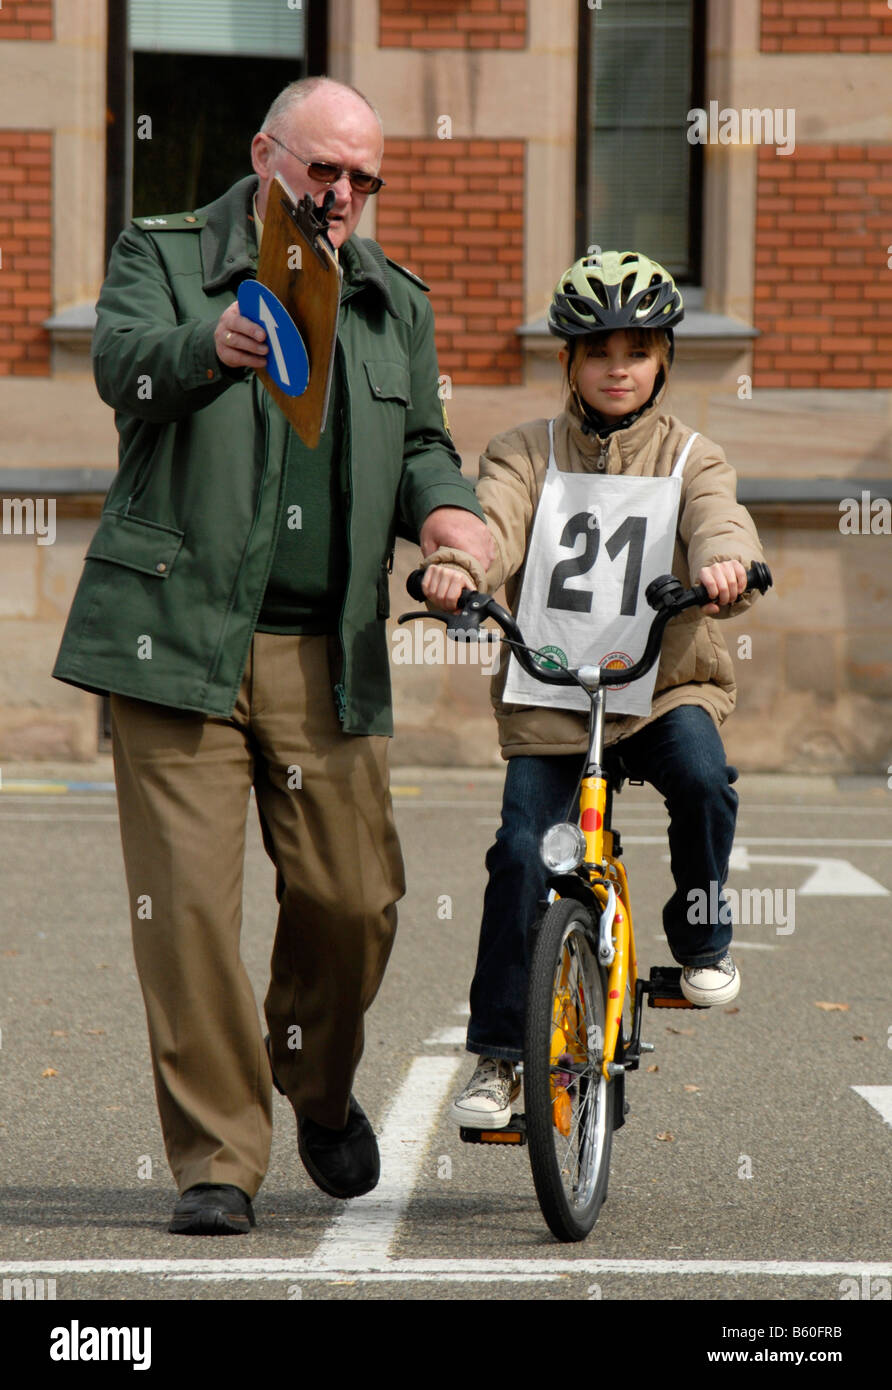 Traffic Education, 10-year-old girl on a bicycle beside a police officer Stock Photo